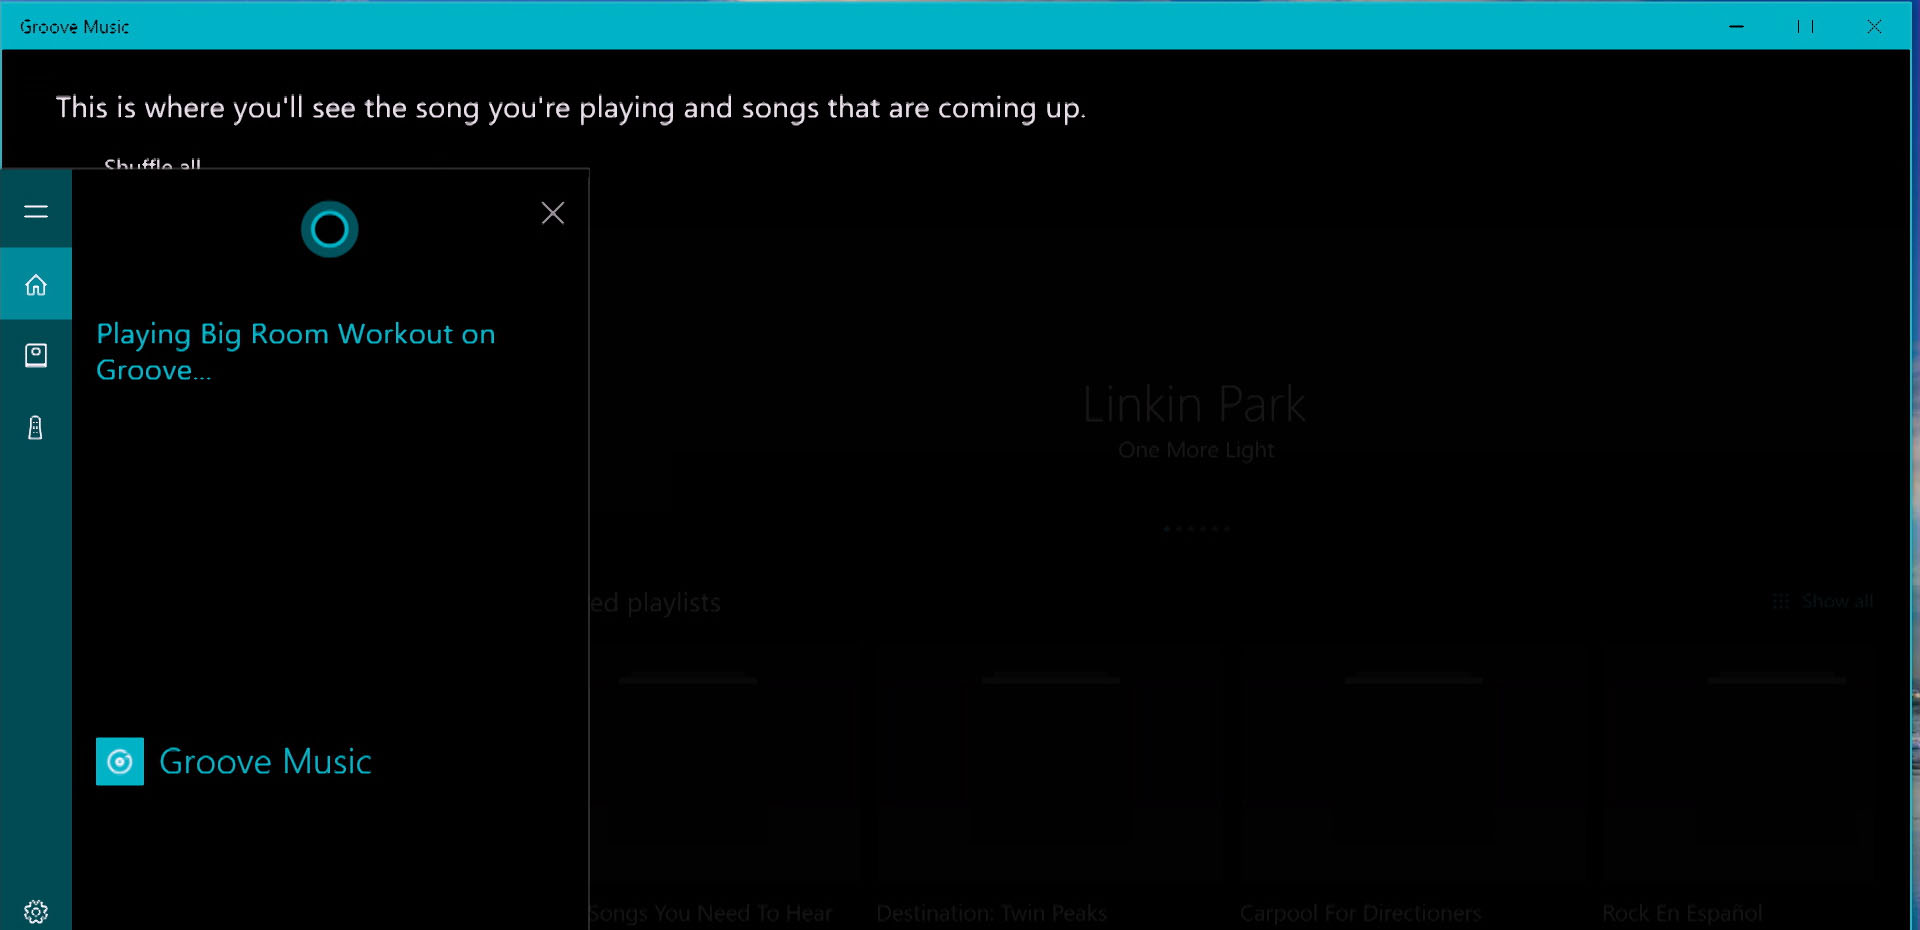 Groove now supports the ability to play music by mood, category or activity so you can say, “Hey Cortana, play me some workout music.”**